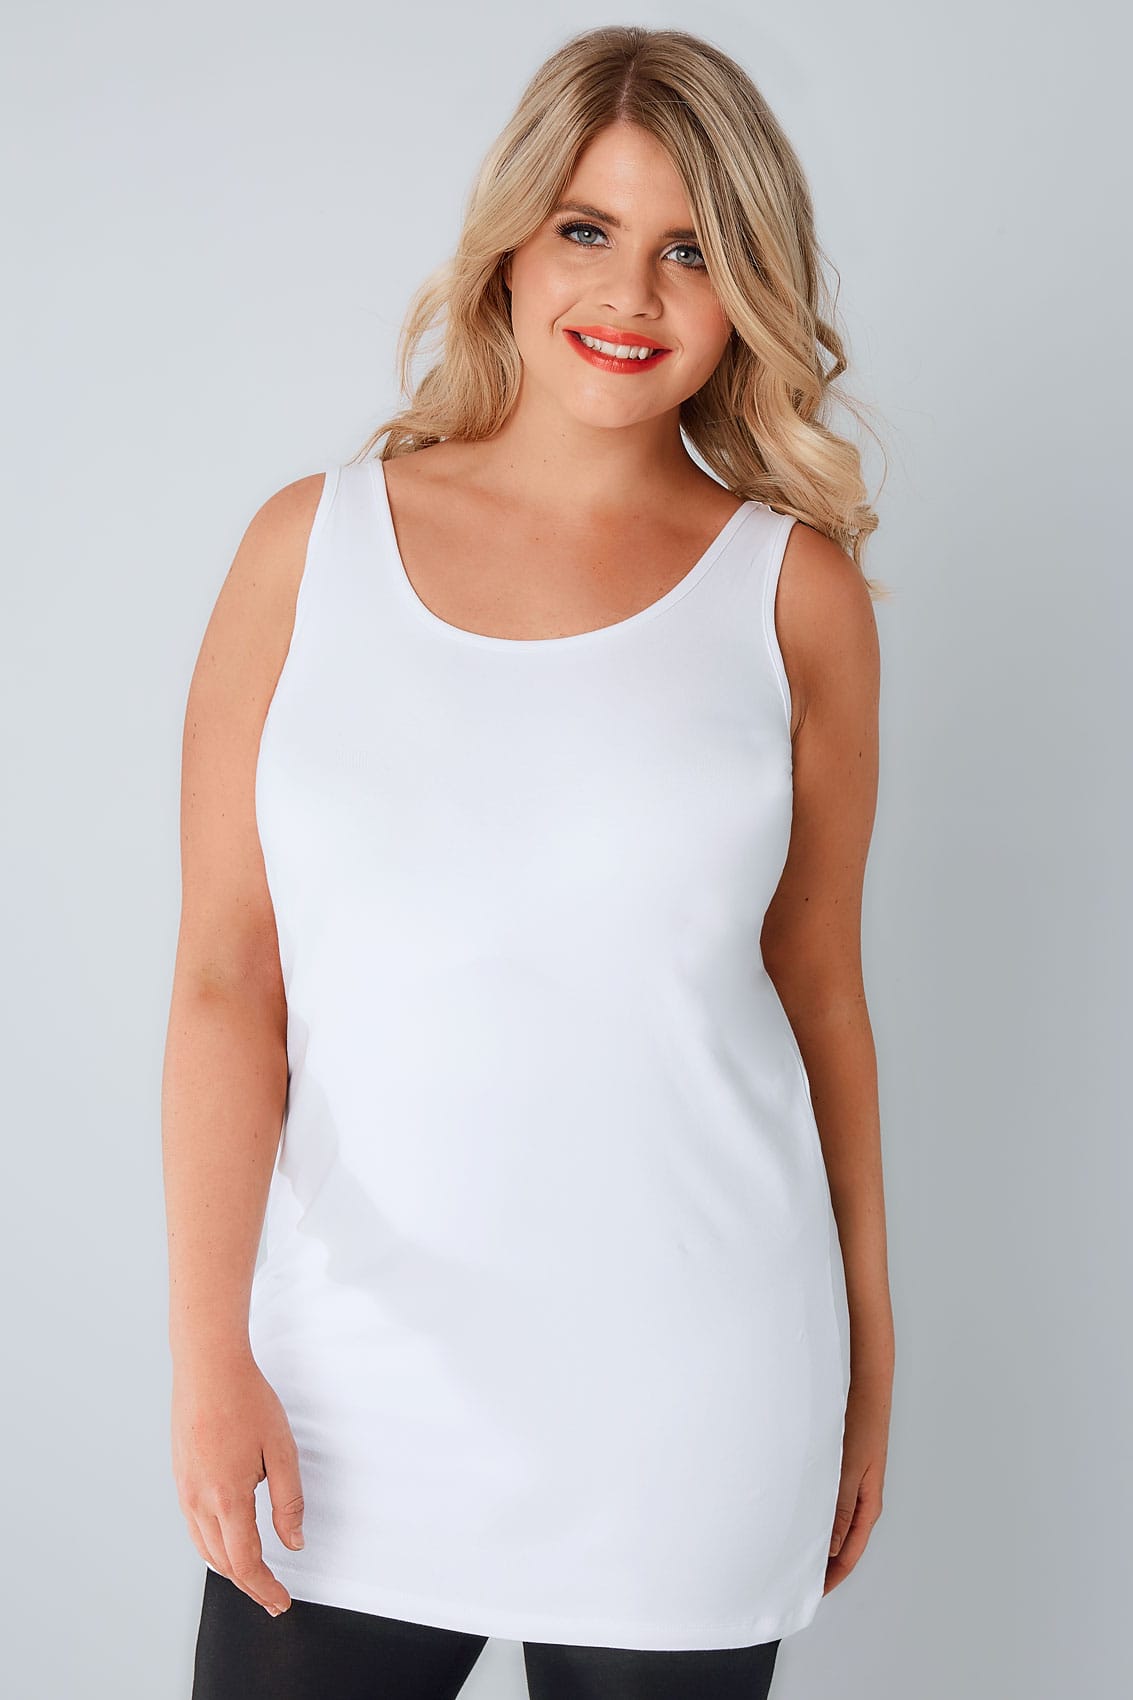 Womens clothing next day delivery australia